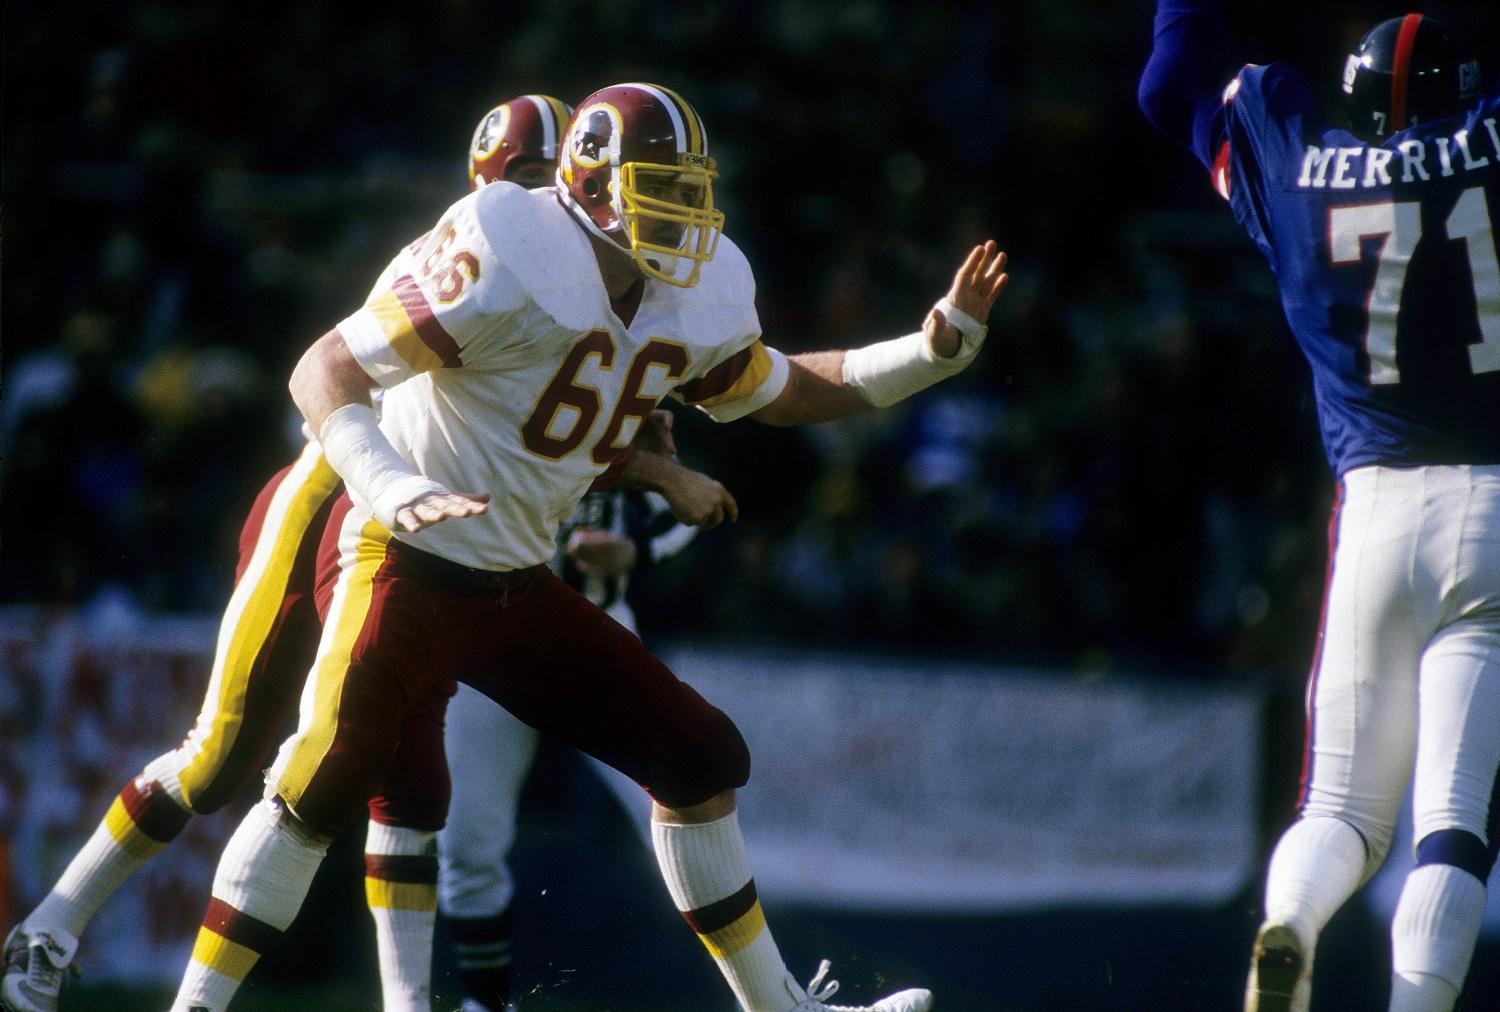 Washington tackle Joe Jacoby, an overlooked Pro Football Hall of Fame candidate, blocks during a 1980s game against the New York Giants.